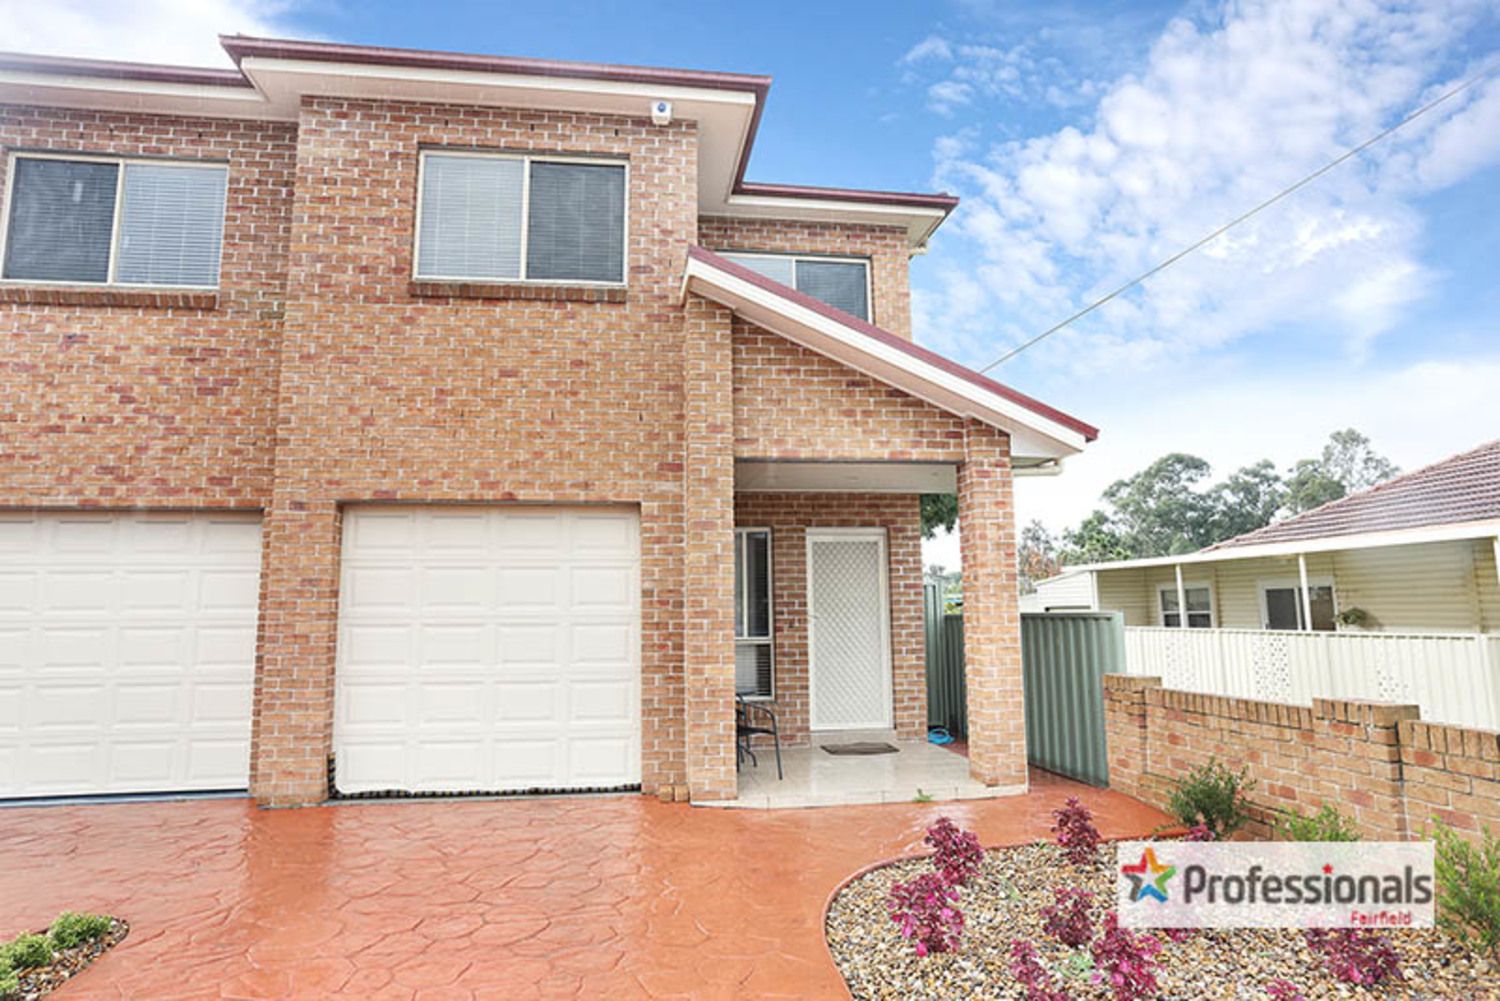 37 Rosedale Street, Canley Heights NSW 2166, Image 0